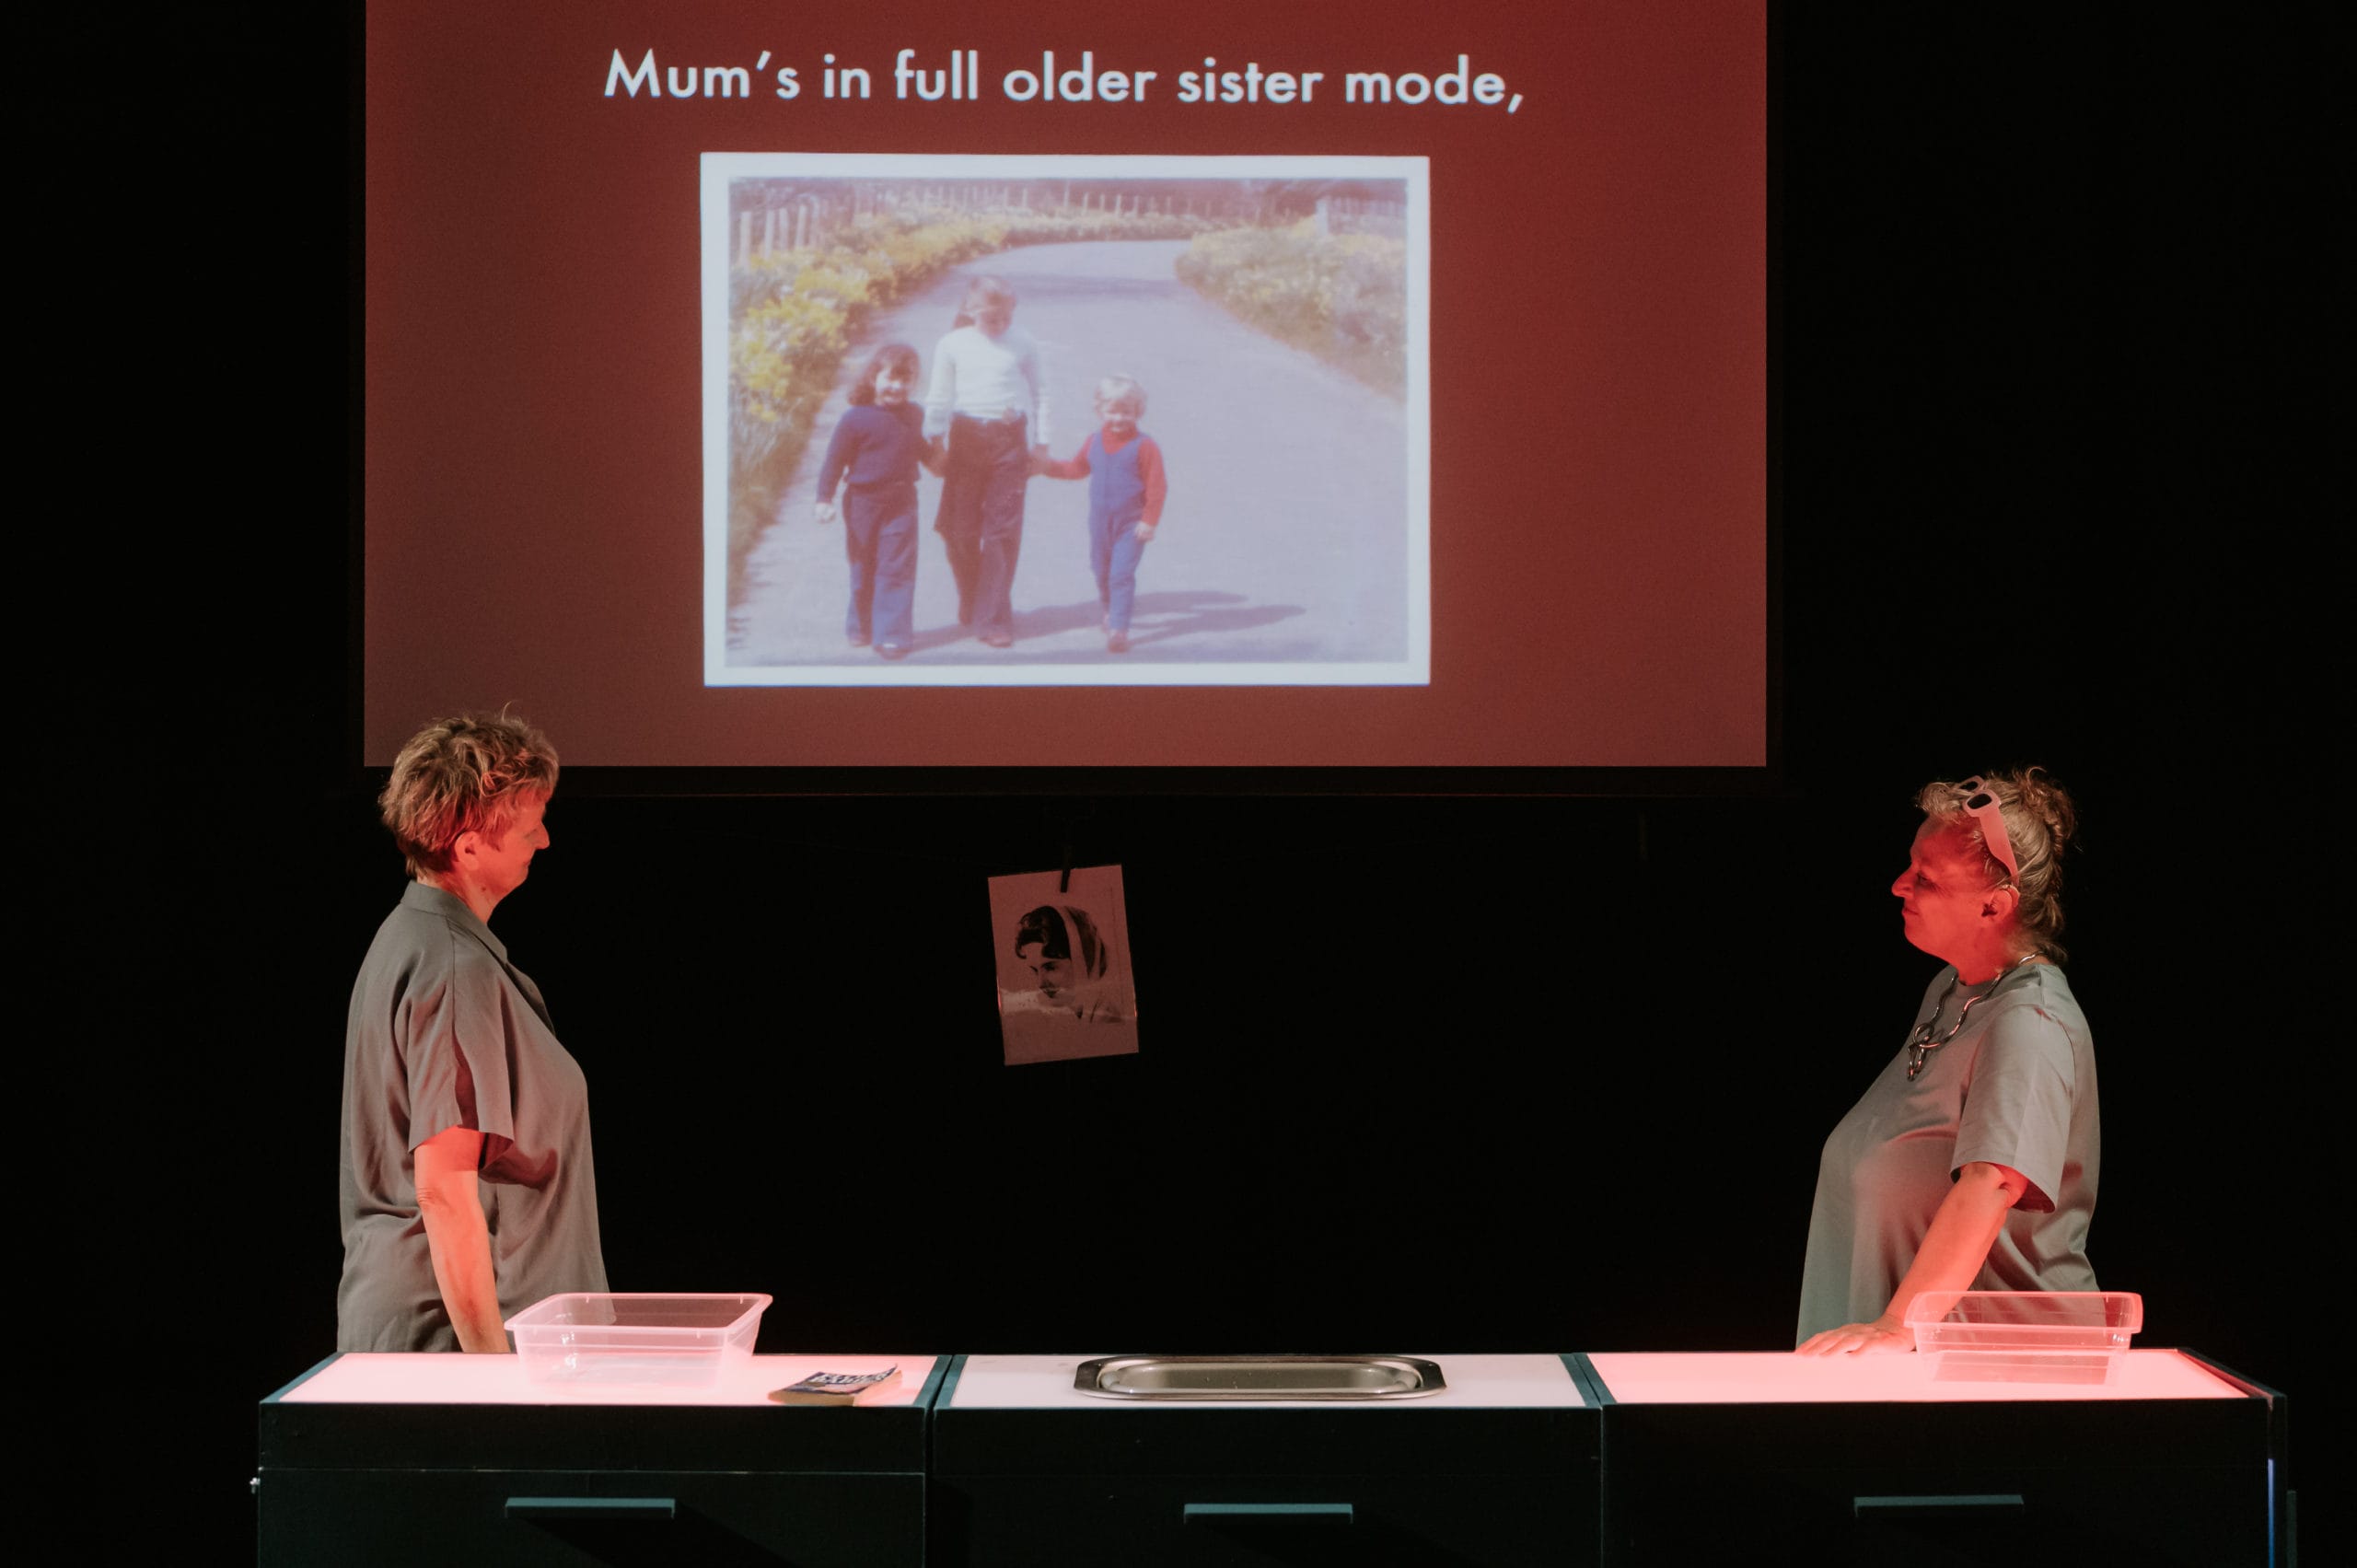 Two women stand facing each other, a screen with a picture is projected in the background.